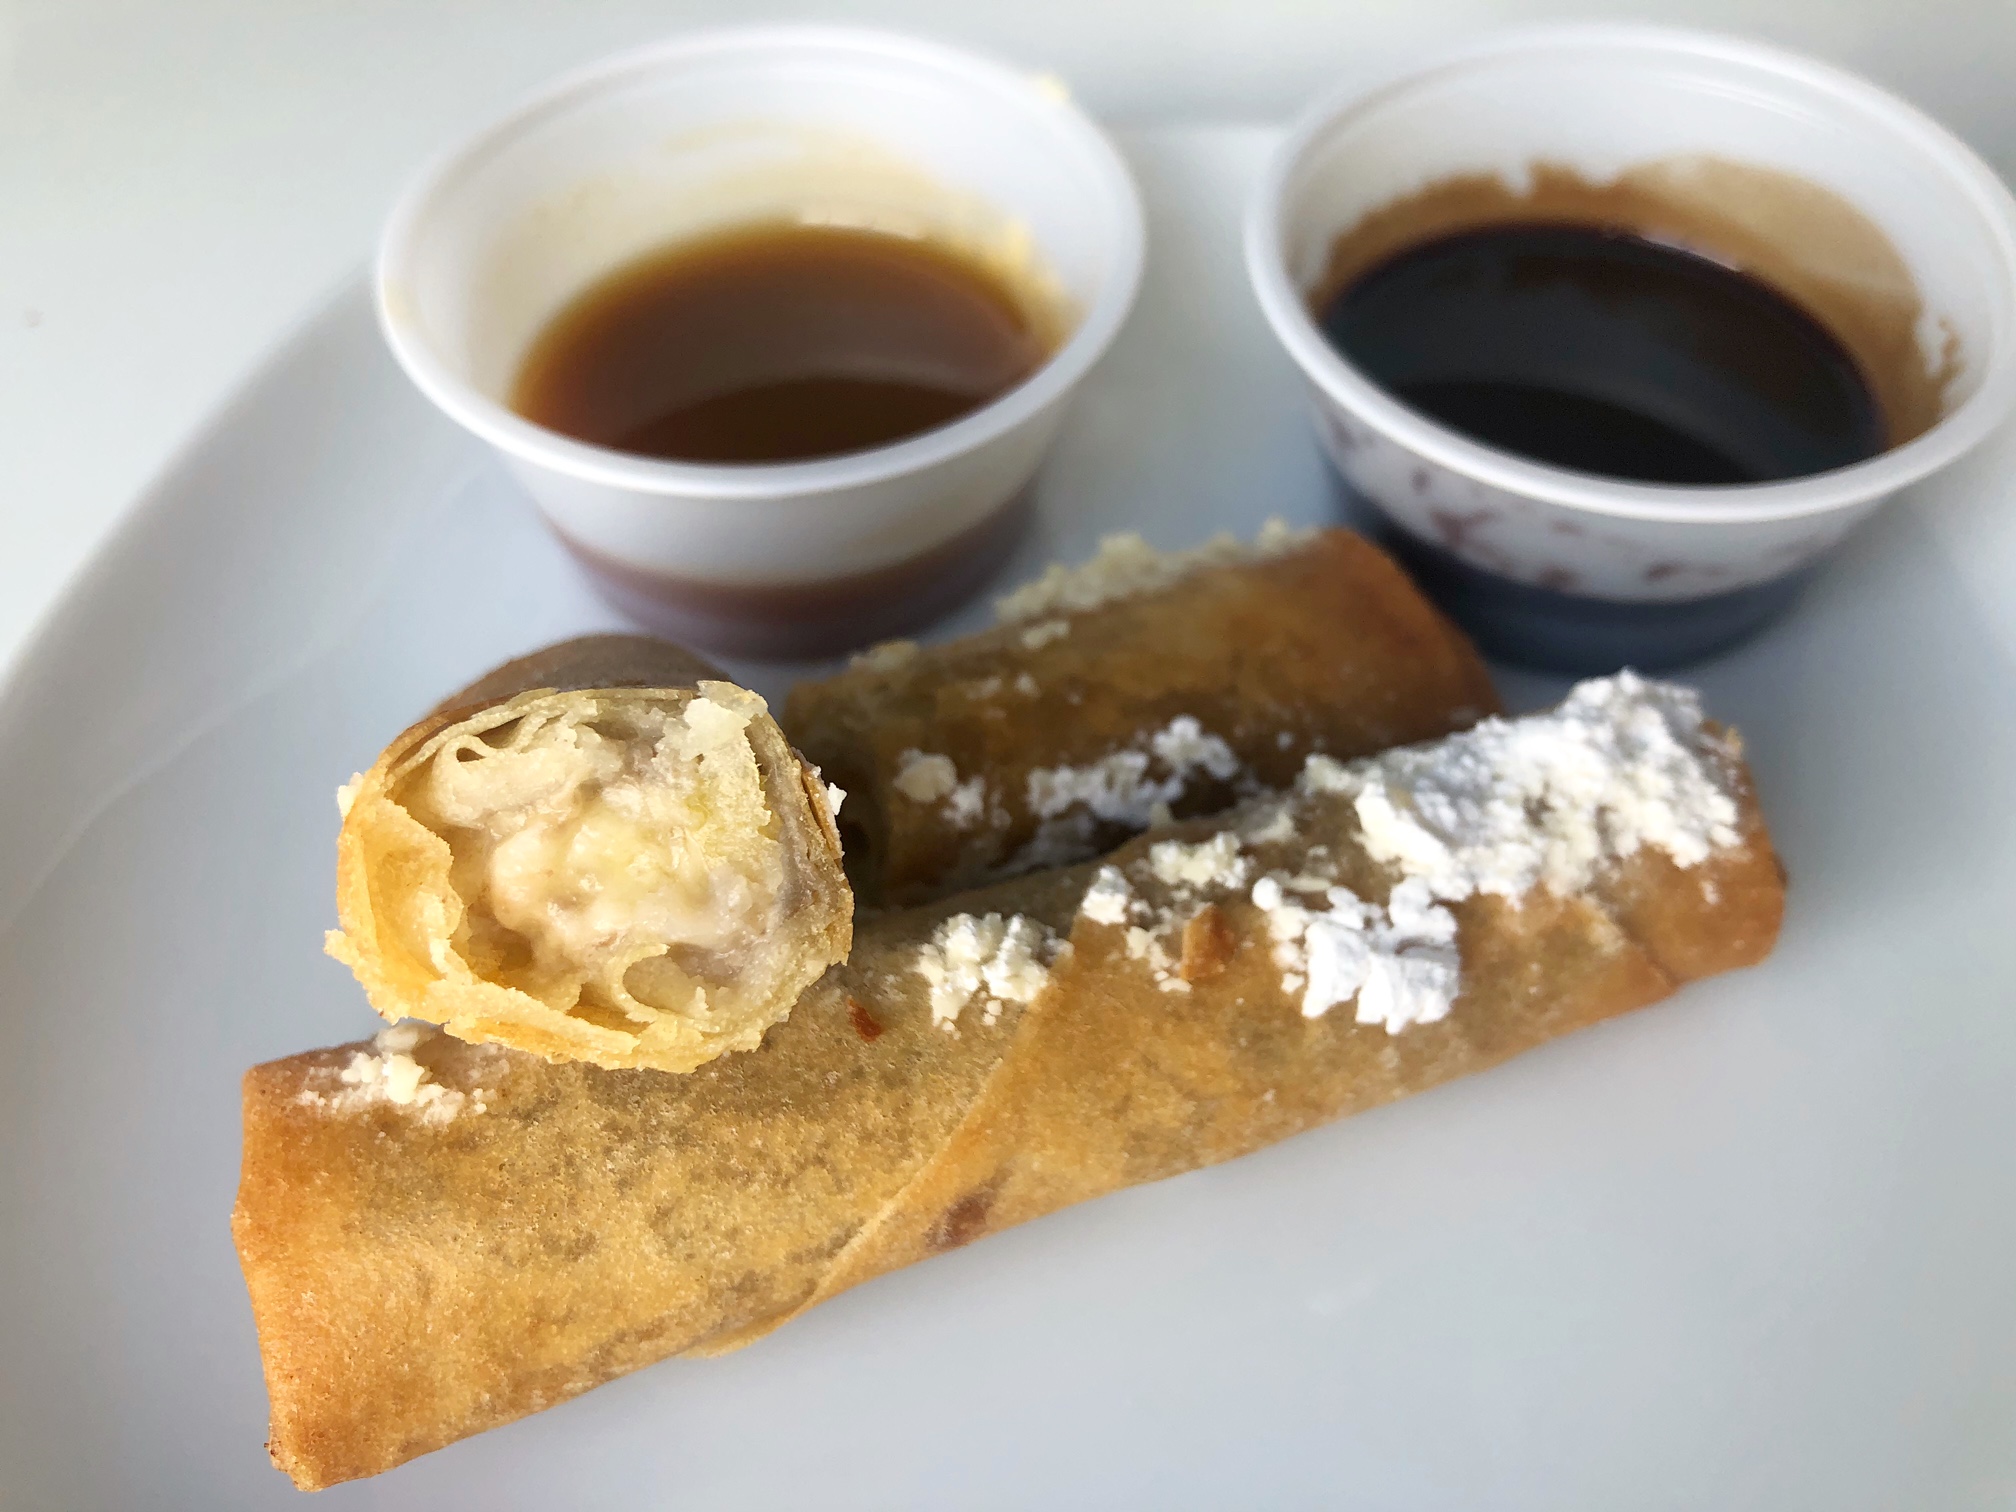 On a white plate, there are two dessert egg rolls. One is sliced in half and rest on top of the second one. Both are dusted with powdered sugar. Photo by Alyssa Buckley.